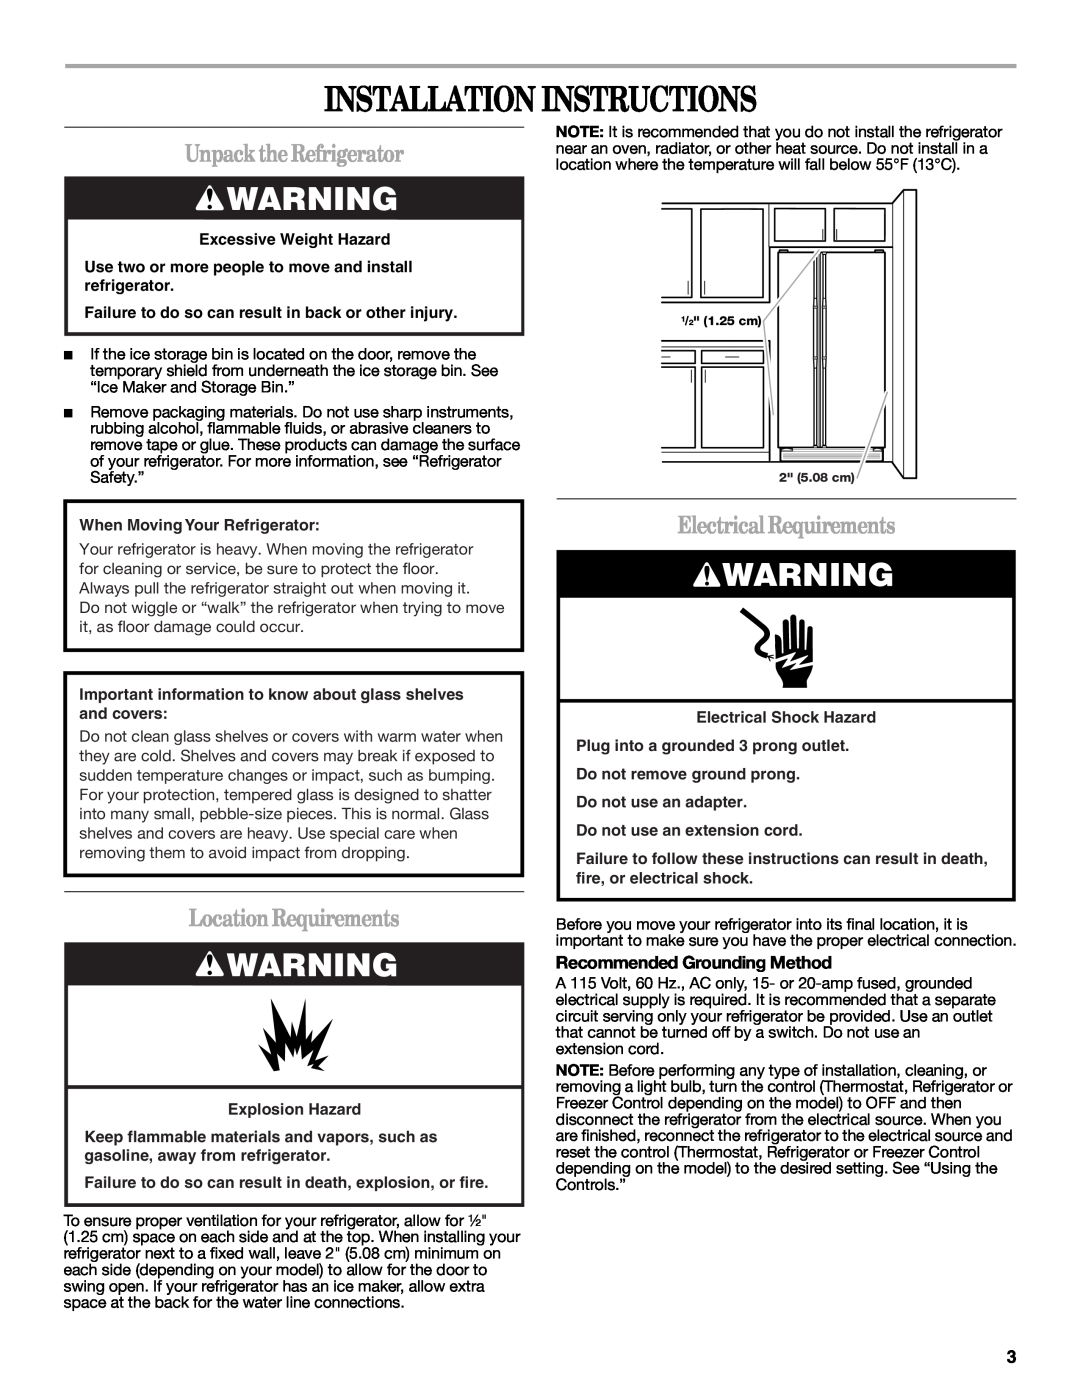 Whirlpool ED5LVAXV warranty Installation Instructions, UnpacktheRefrigerator, LocationRequirements, ElectricalRequirements 